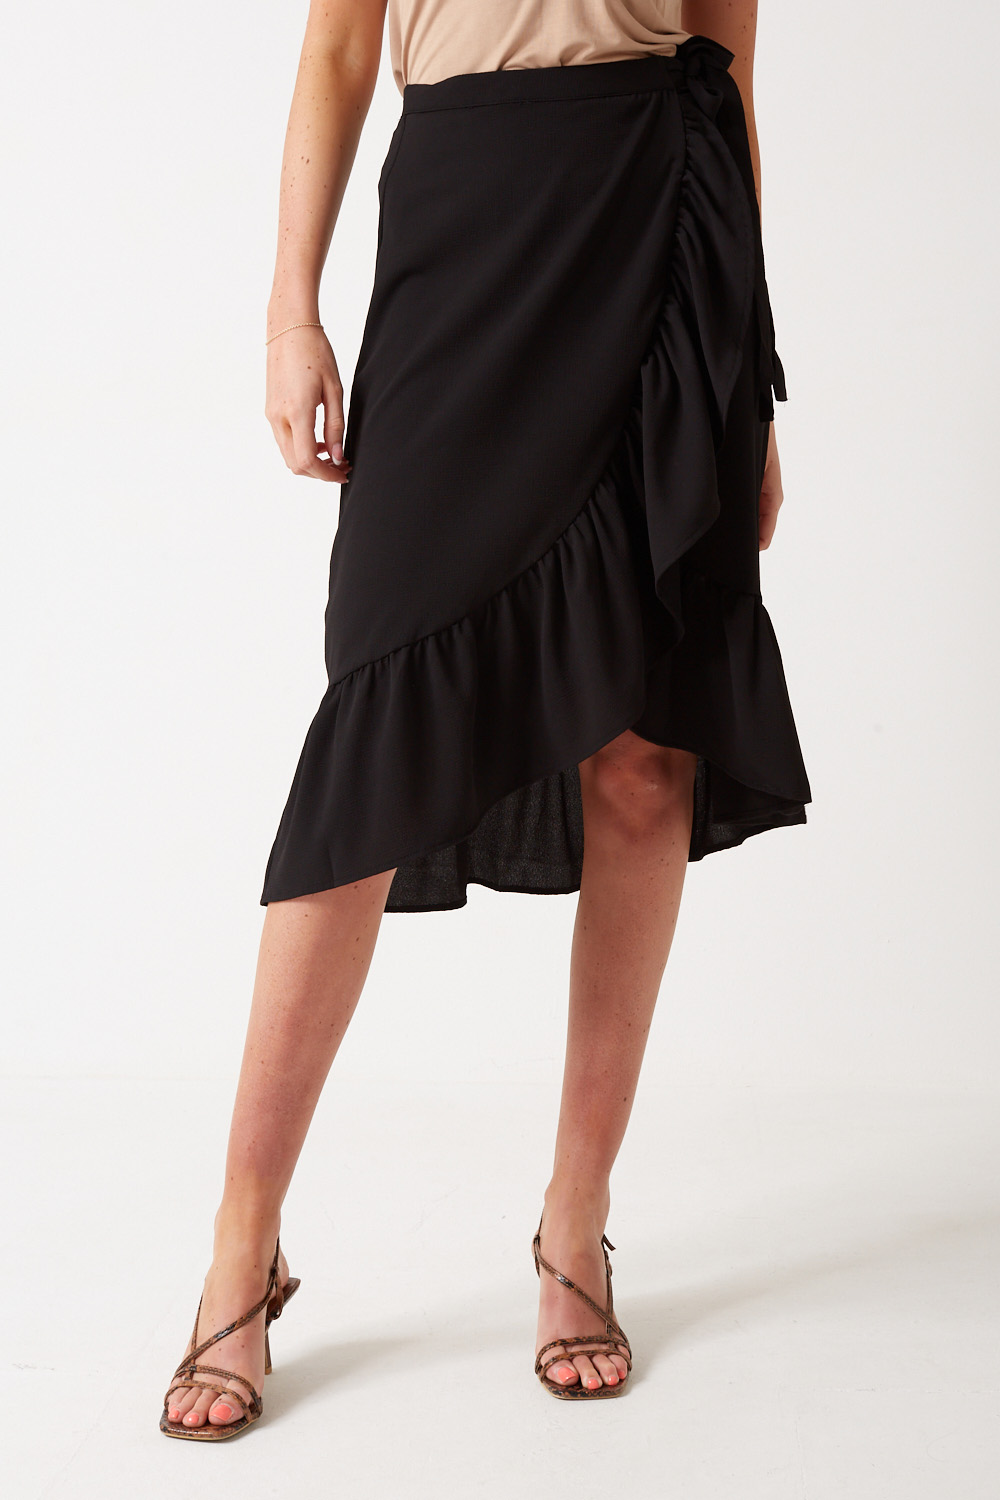 JDY Piper Frill Wrap Skirt in Black | iCLOTHING - iCLOTHING